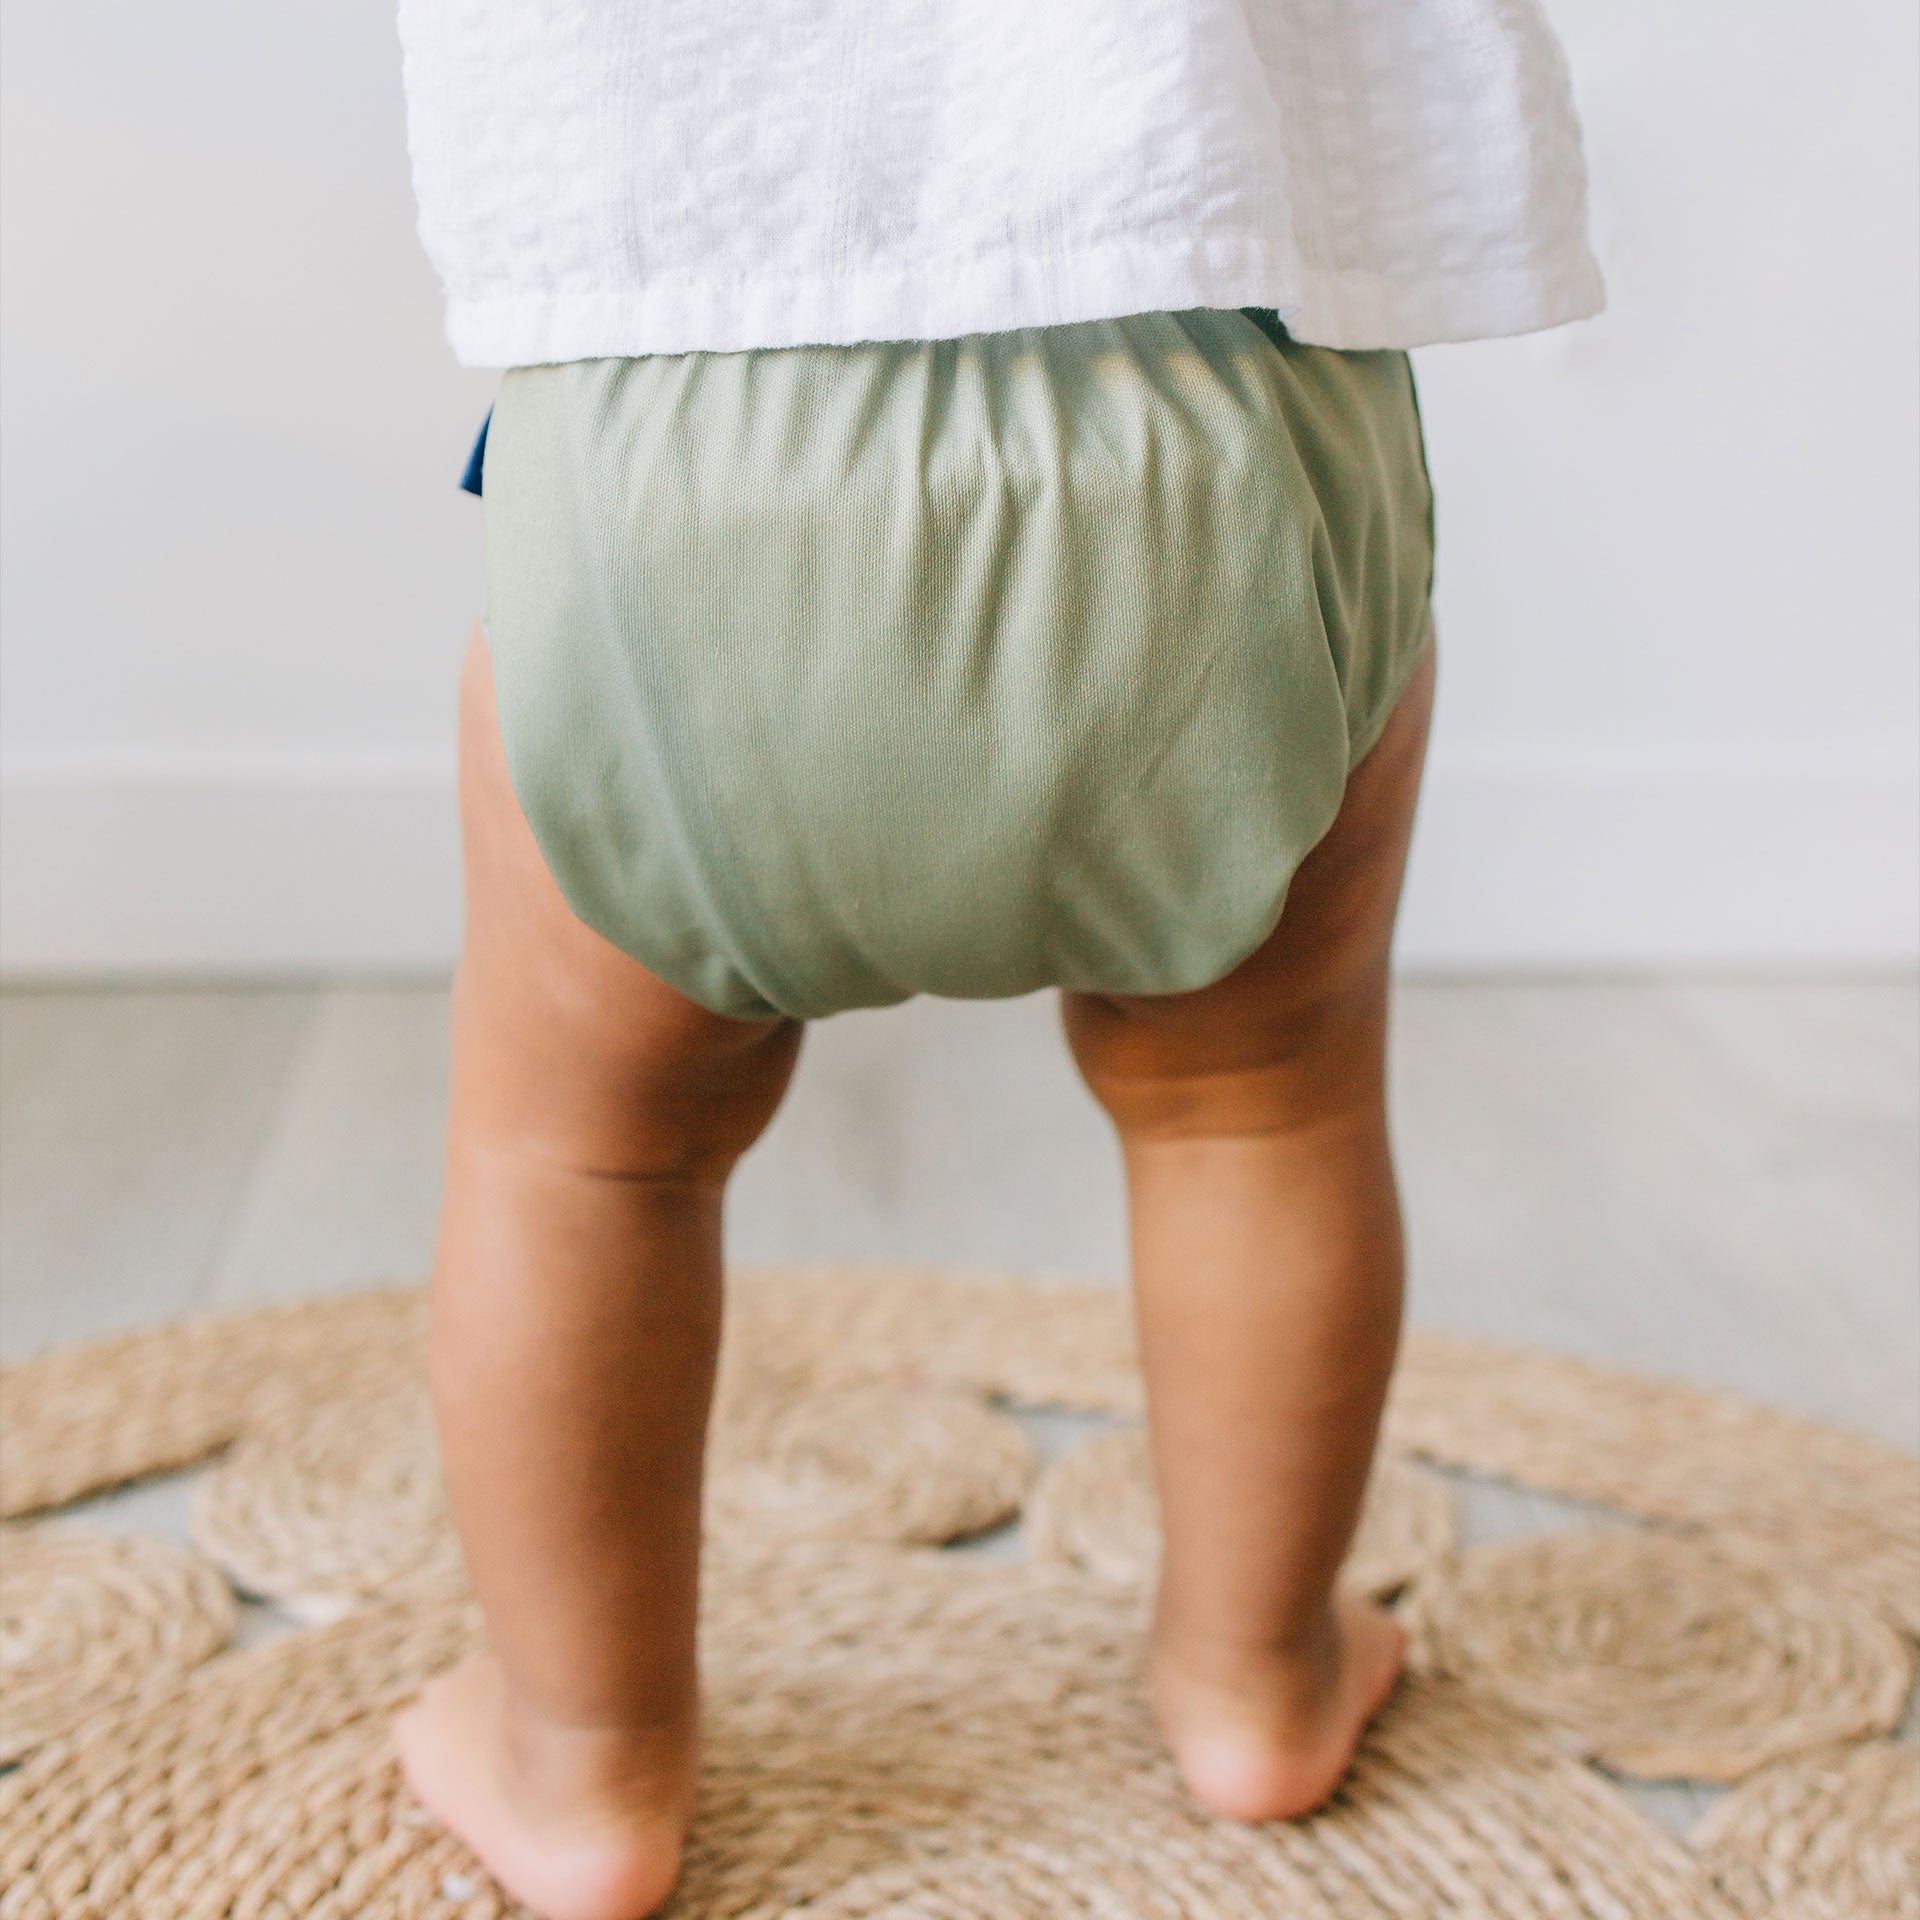 Pocket Diapers vs. Diaper Covers: Which style is right for your